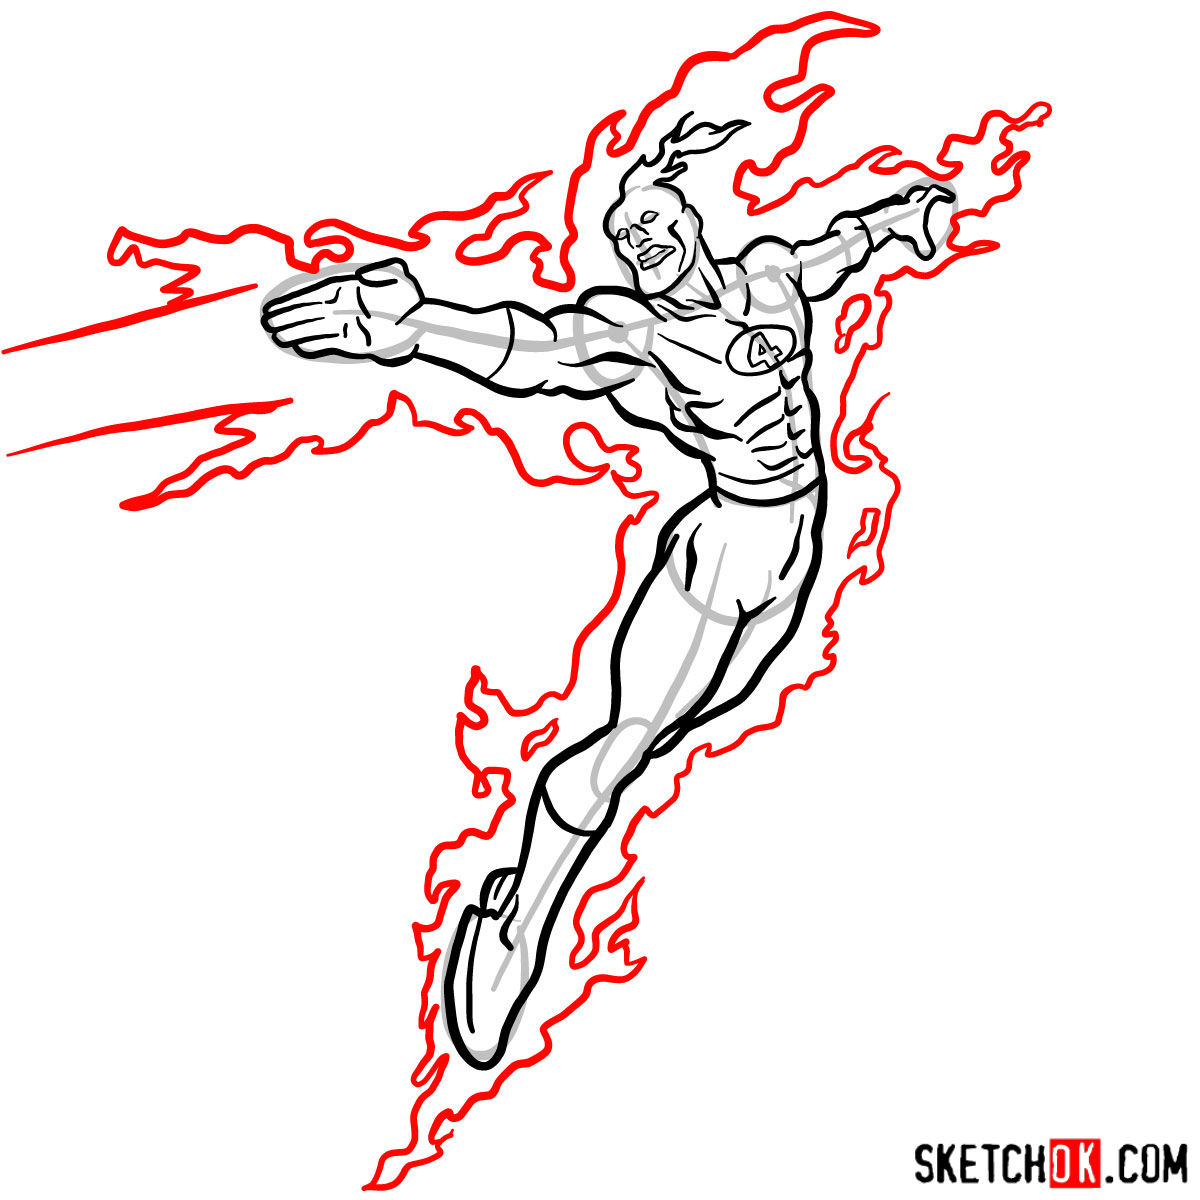 How to draw The Human Torch from Fantastic Four - step 11